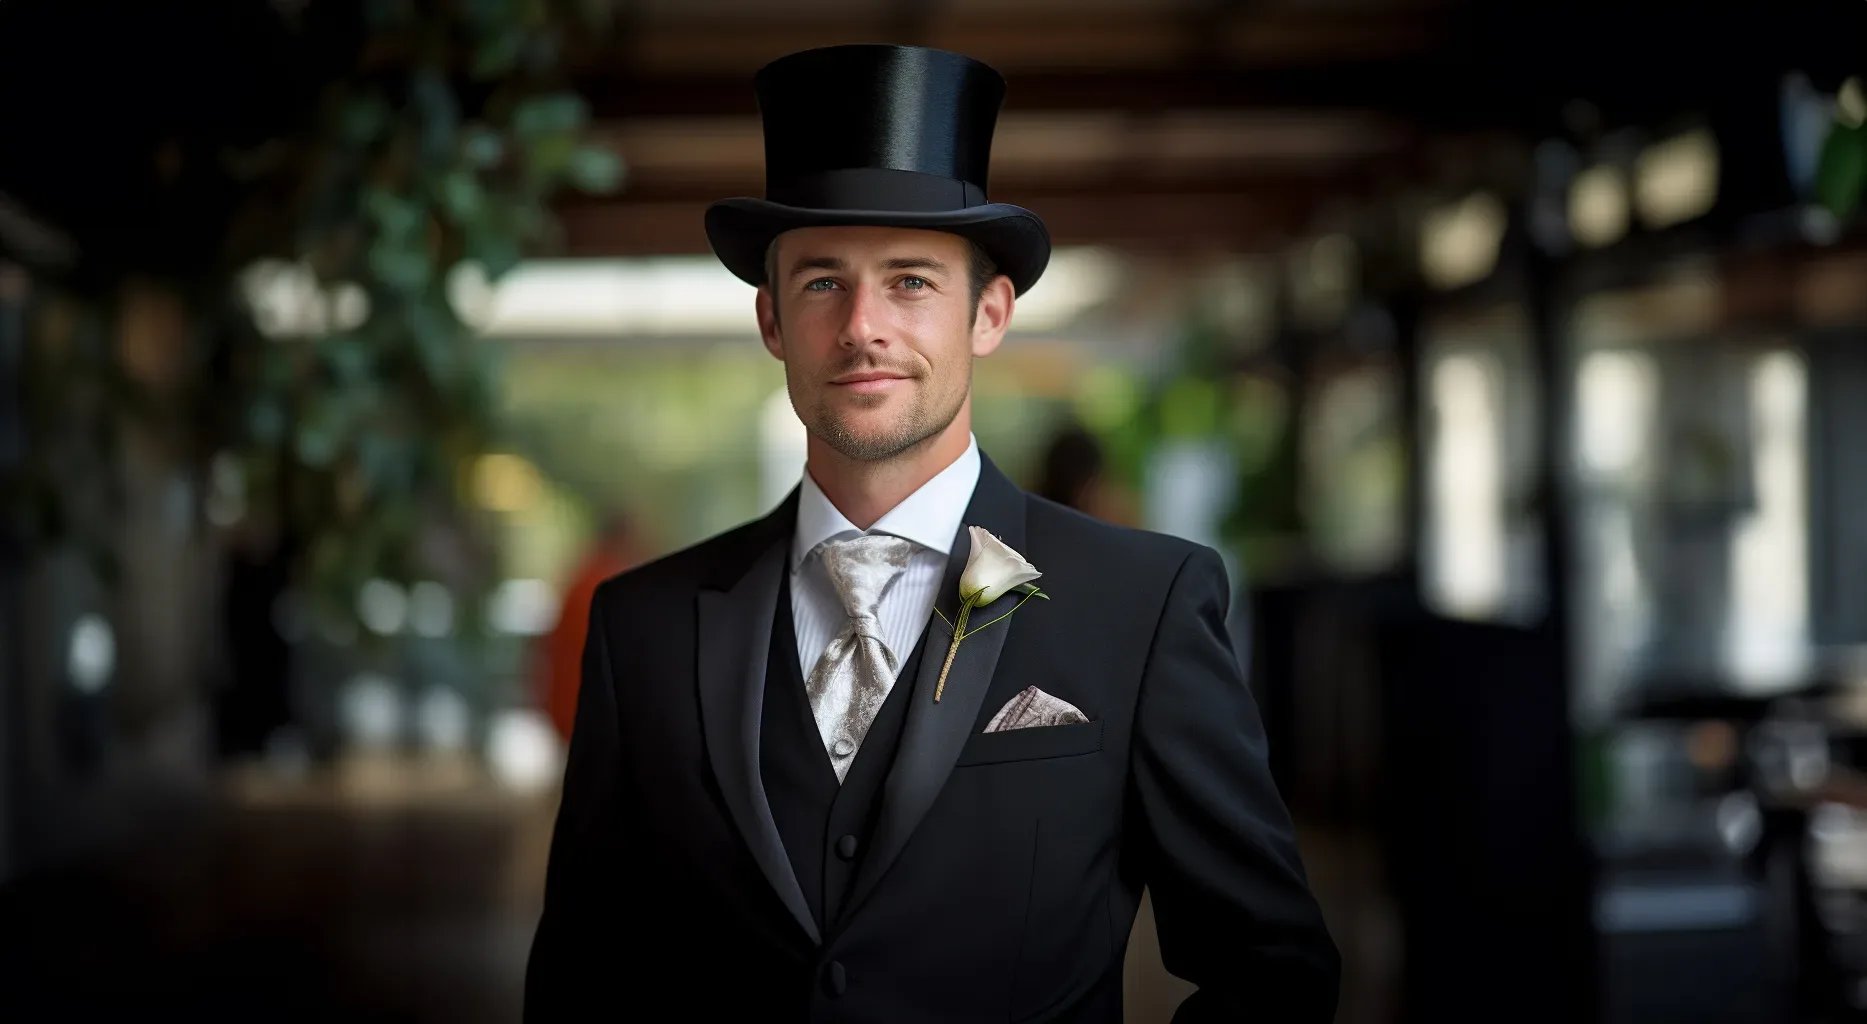 A man in a tuxedo wearing a top hat.MC at your wedding